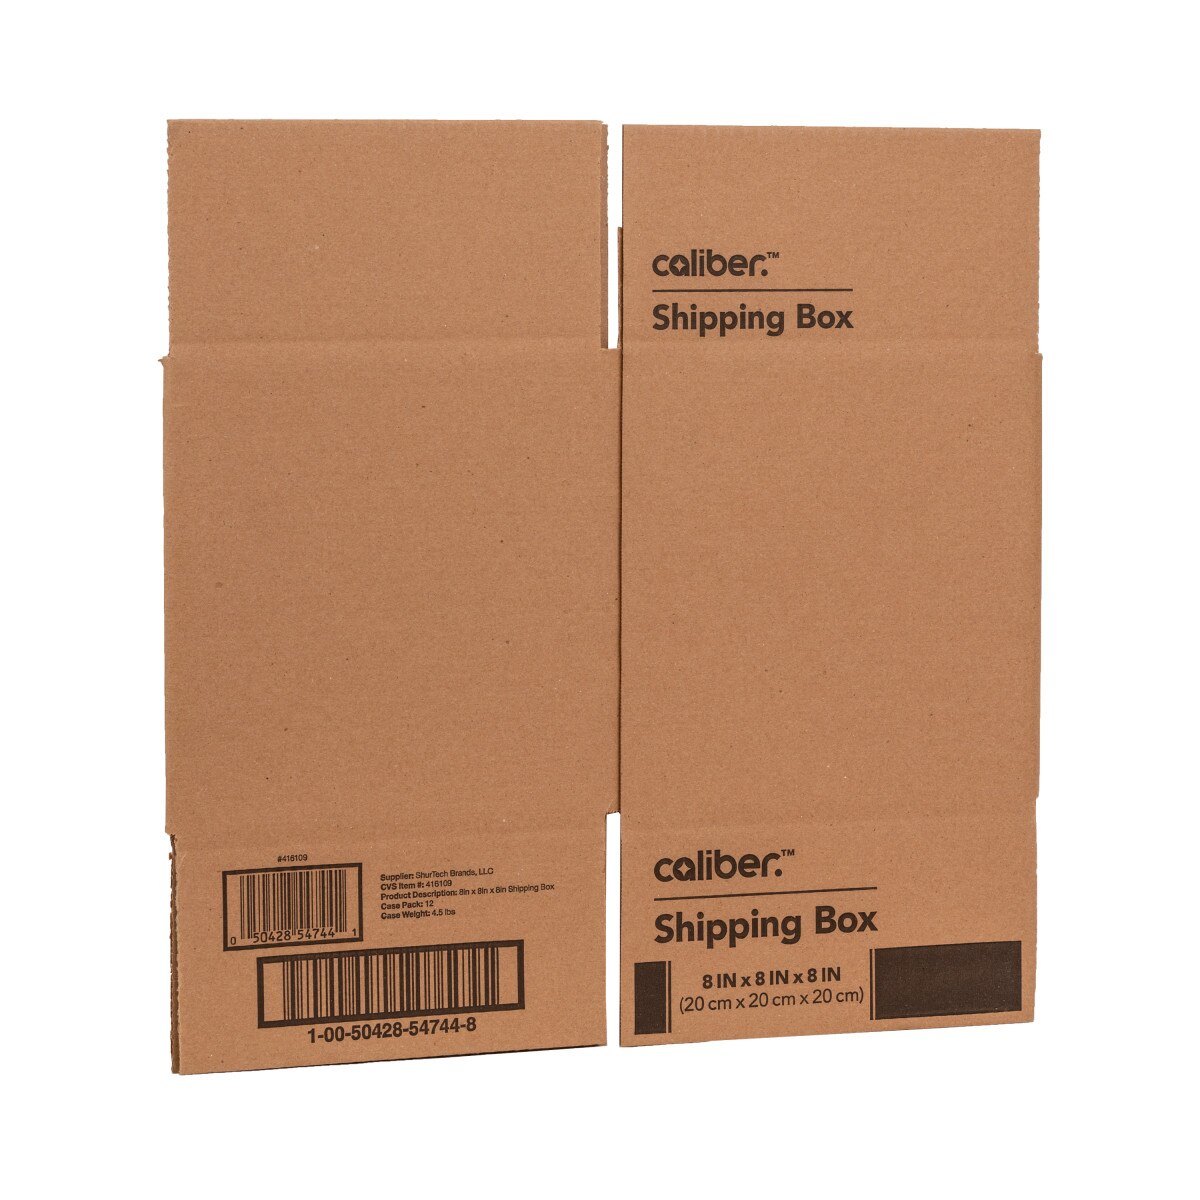 Caliber Mailing Moving & Storage Box, 8 In x 8 In x 8 In